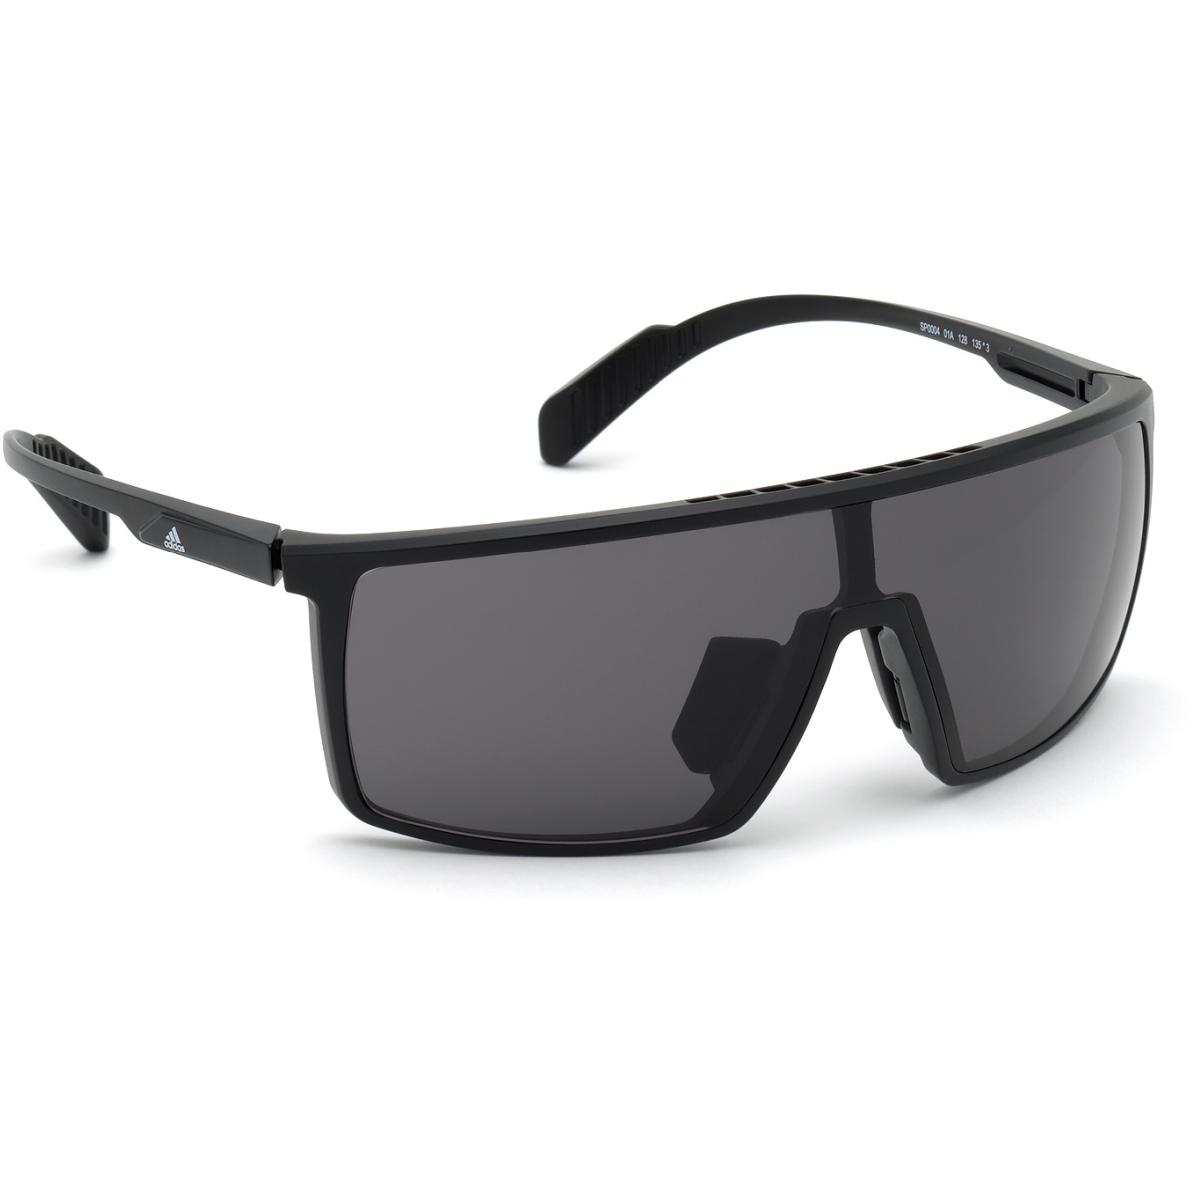 Picture of adidas Sp0004 Injected Sports Sunglasses - Shiny Black / Contrast Grey